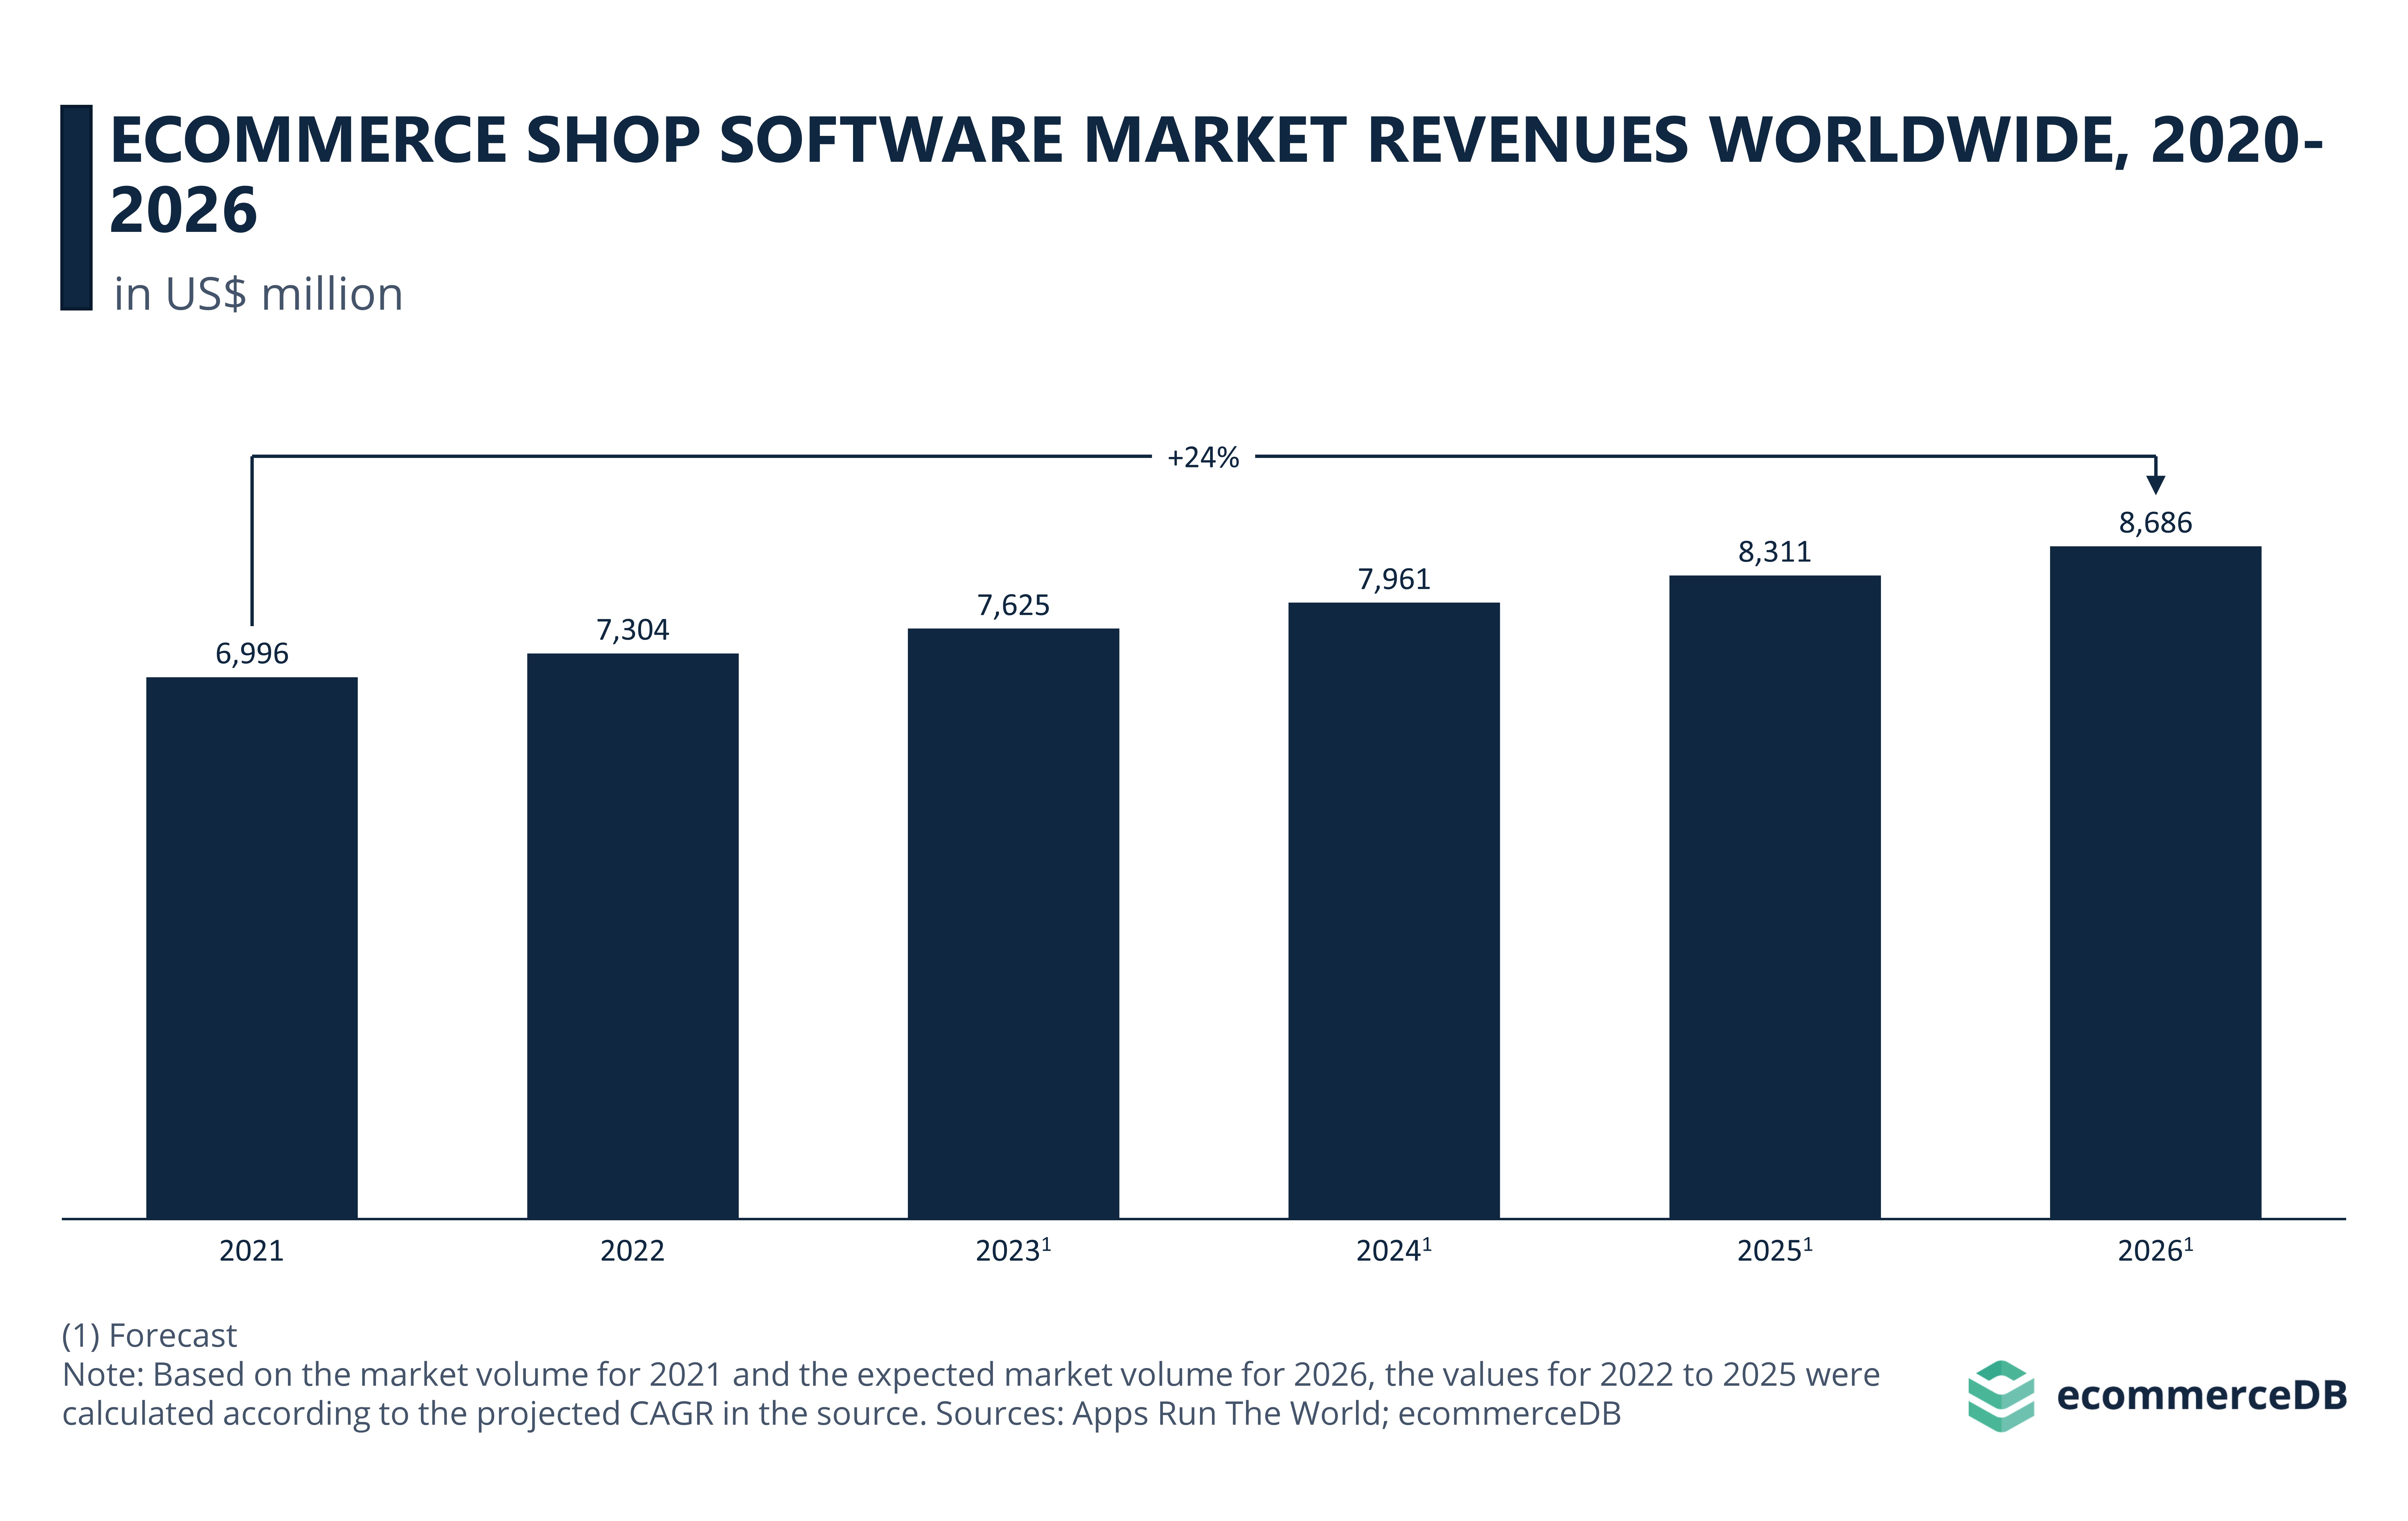 eCommerce shop software market will be worth US$8.7 bn by 2026_final